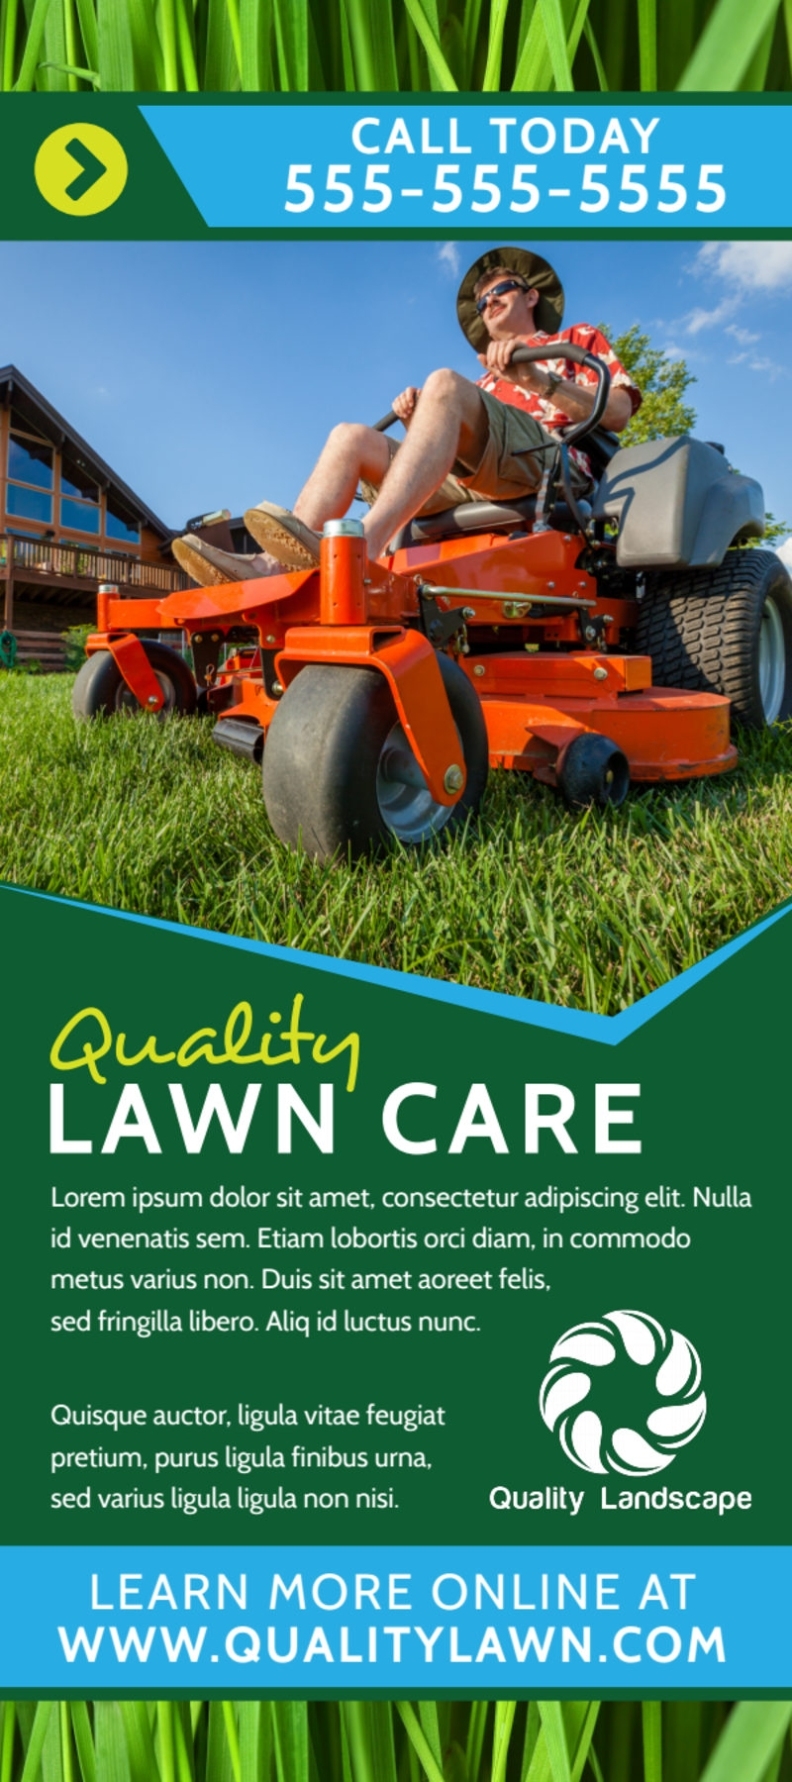 Sample Lawn Care Flyers : #15+ Landscaping Flyers | Medical Resume Throughout Lawn Mowing Flyer Template Free